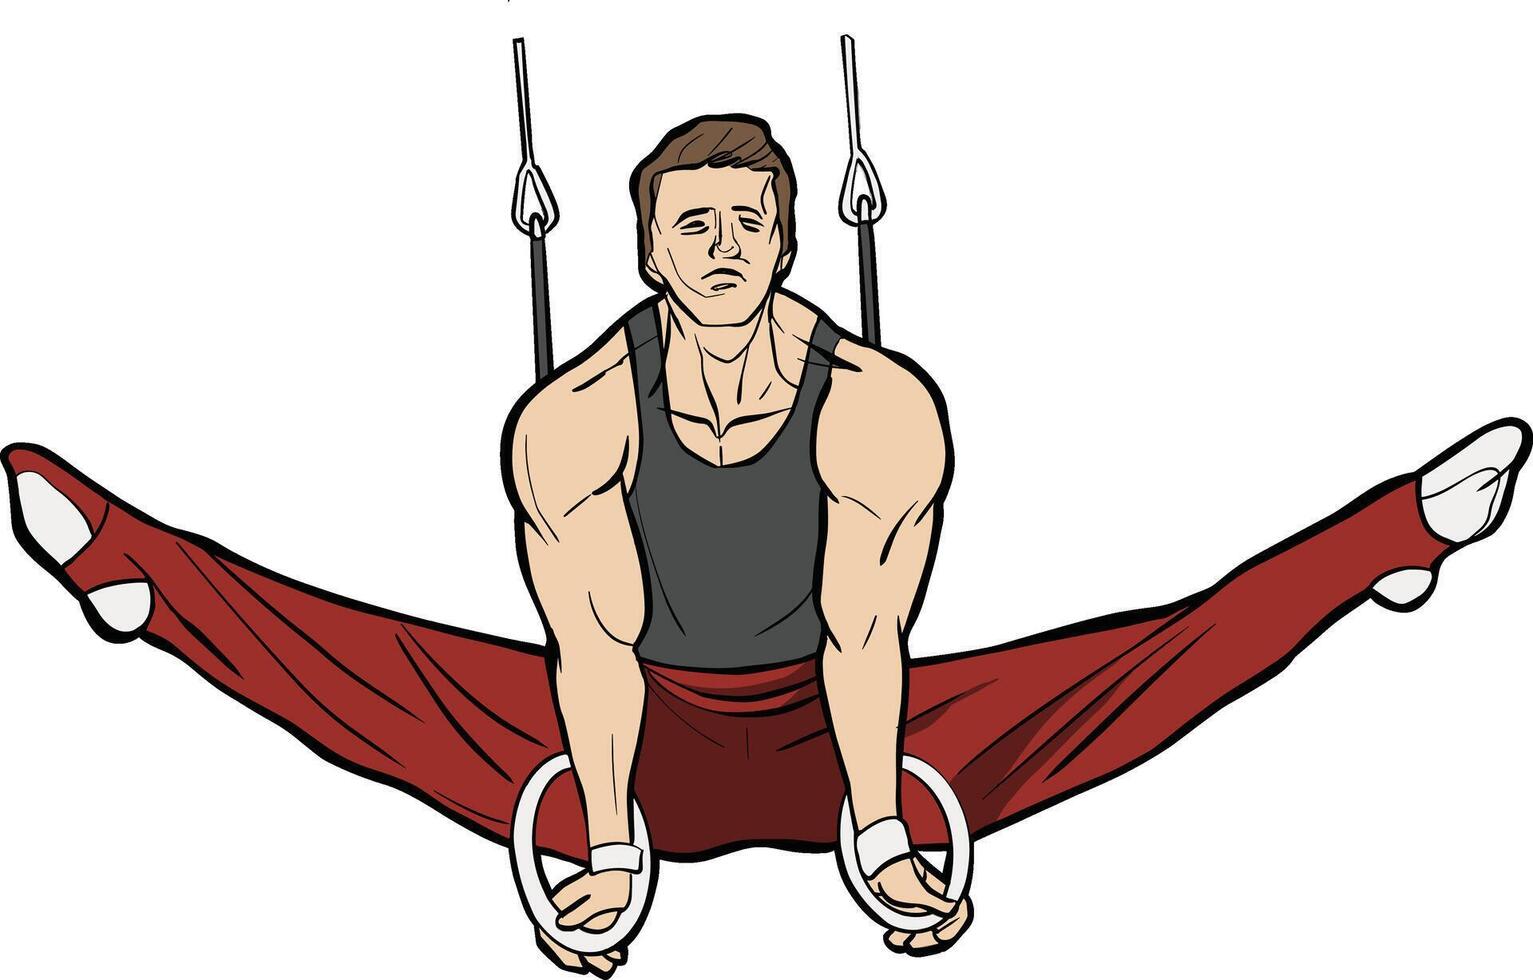 Gymnast Performing a Straddle Planche on Rings vector